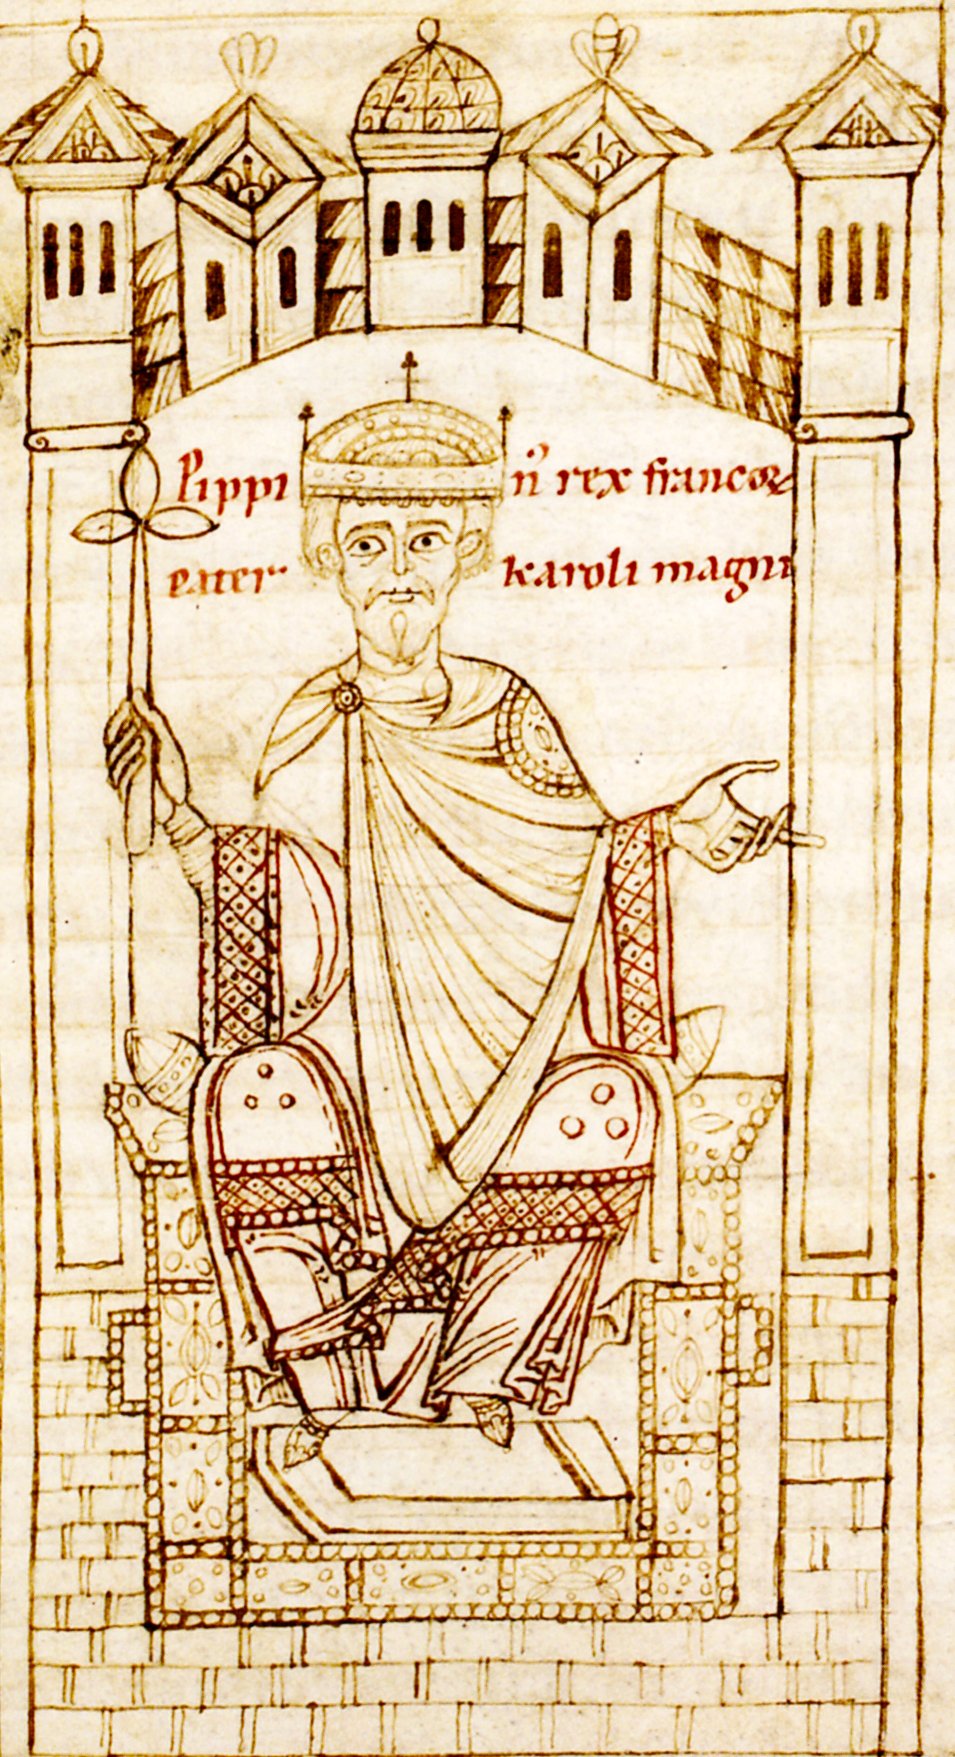 A medieval manuscript illustration of king Pepin the Short on a throne with his name written above him.